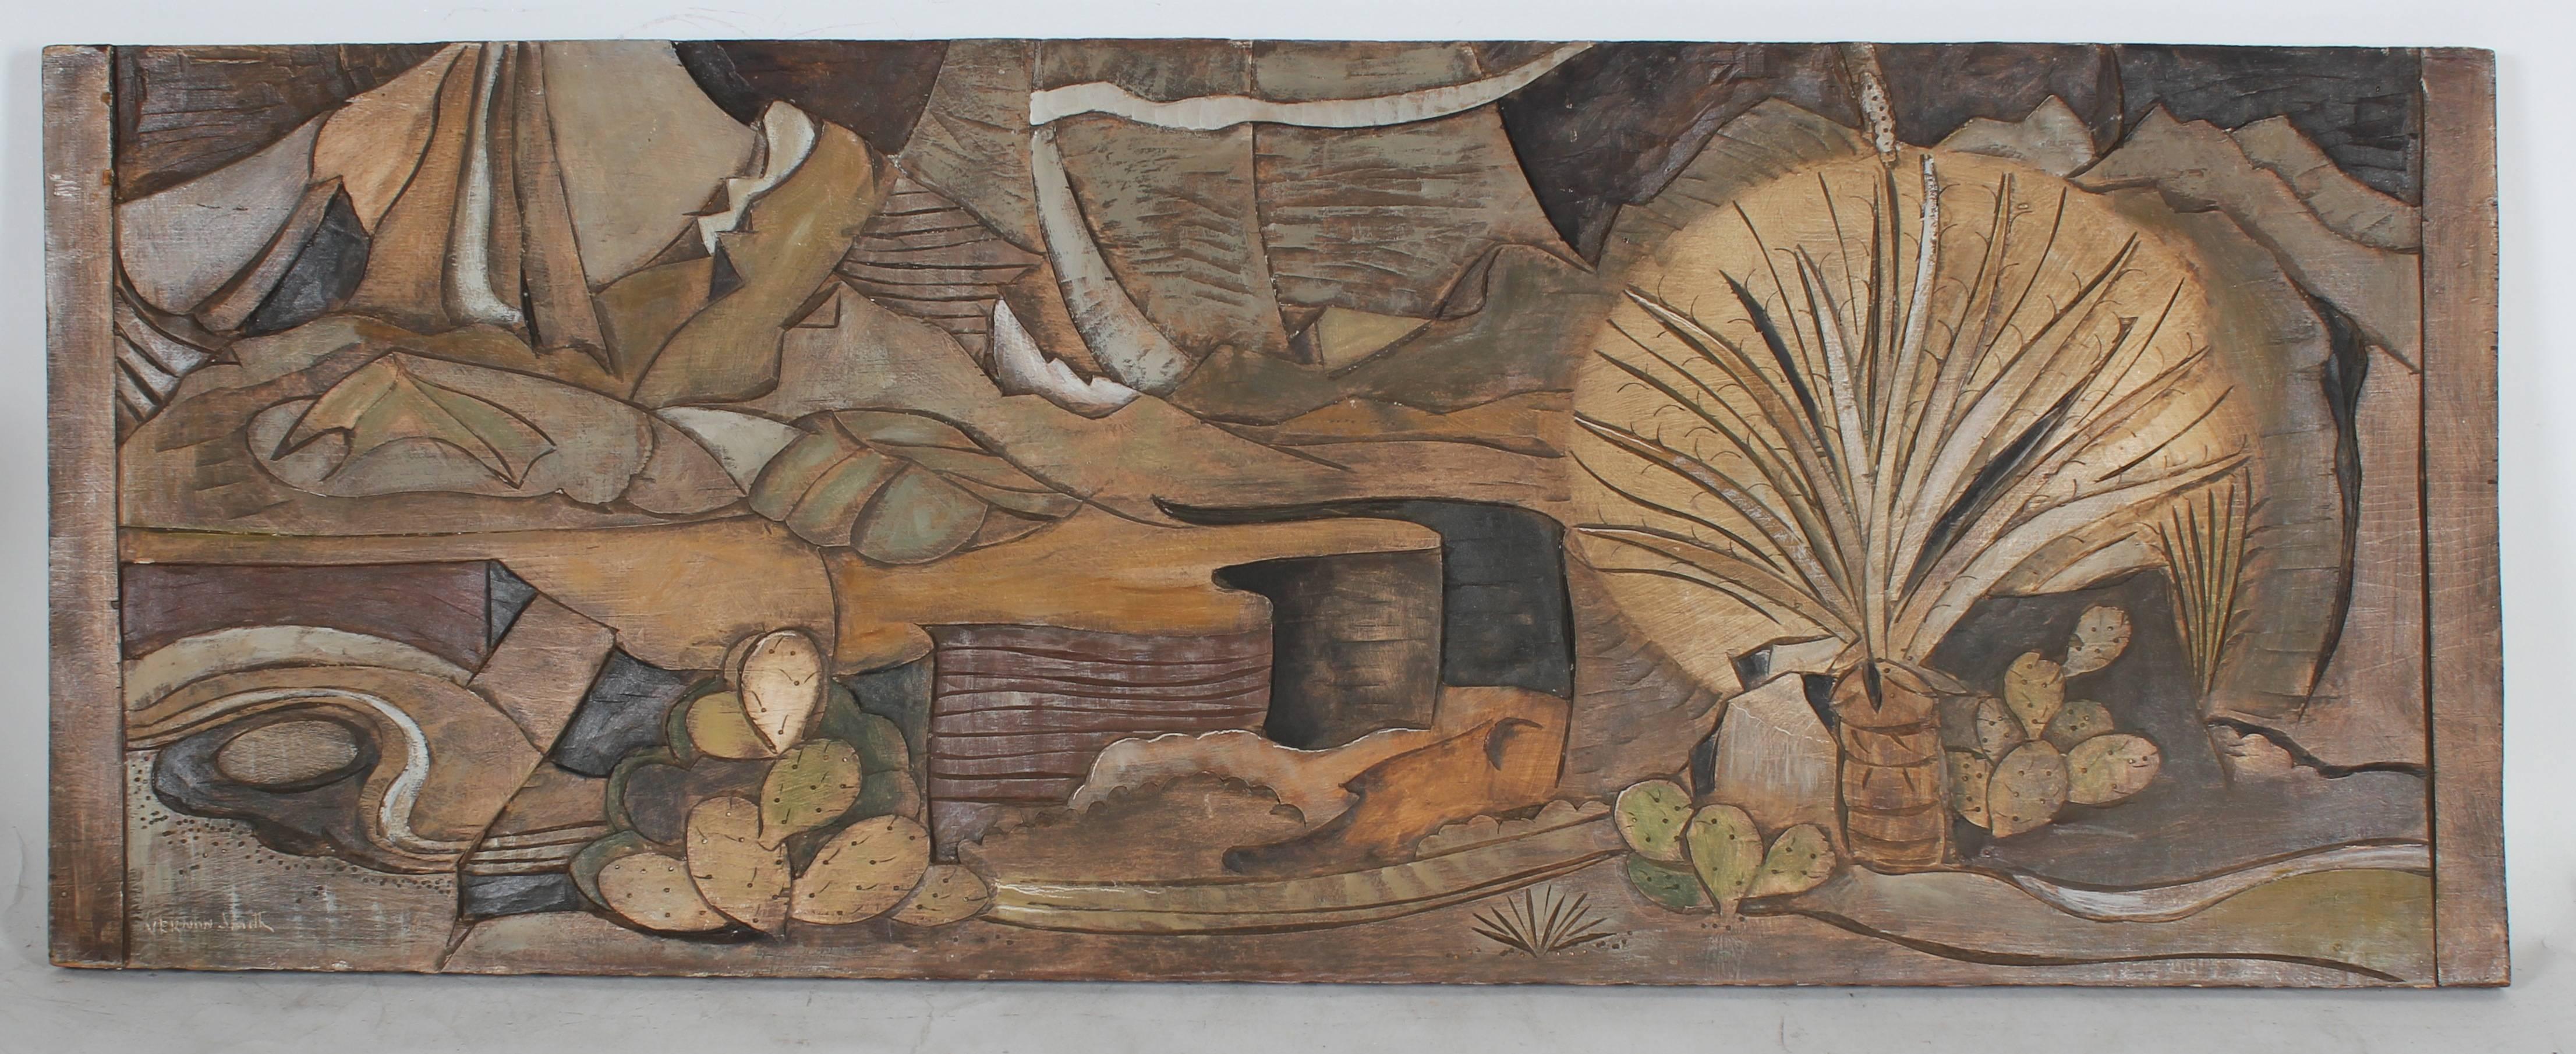 Vernon Smith Landscape Painting - "Desert" Bas Relief in Wood, Circa 1950